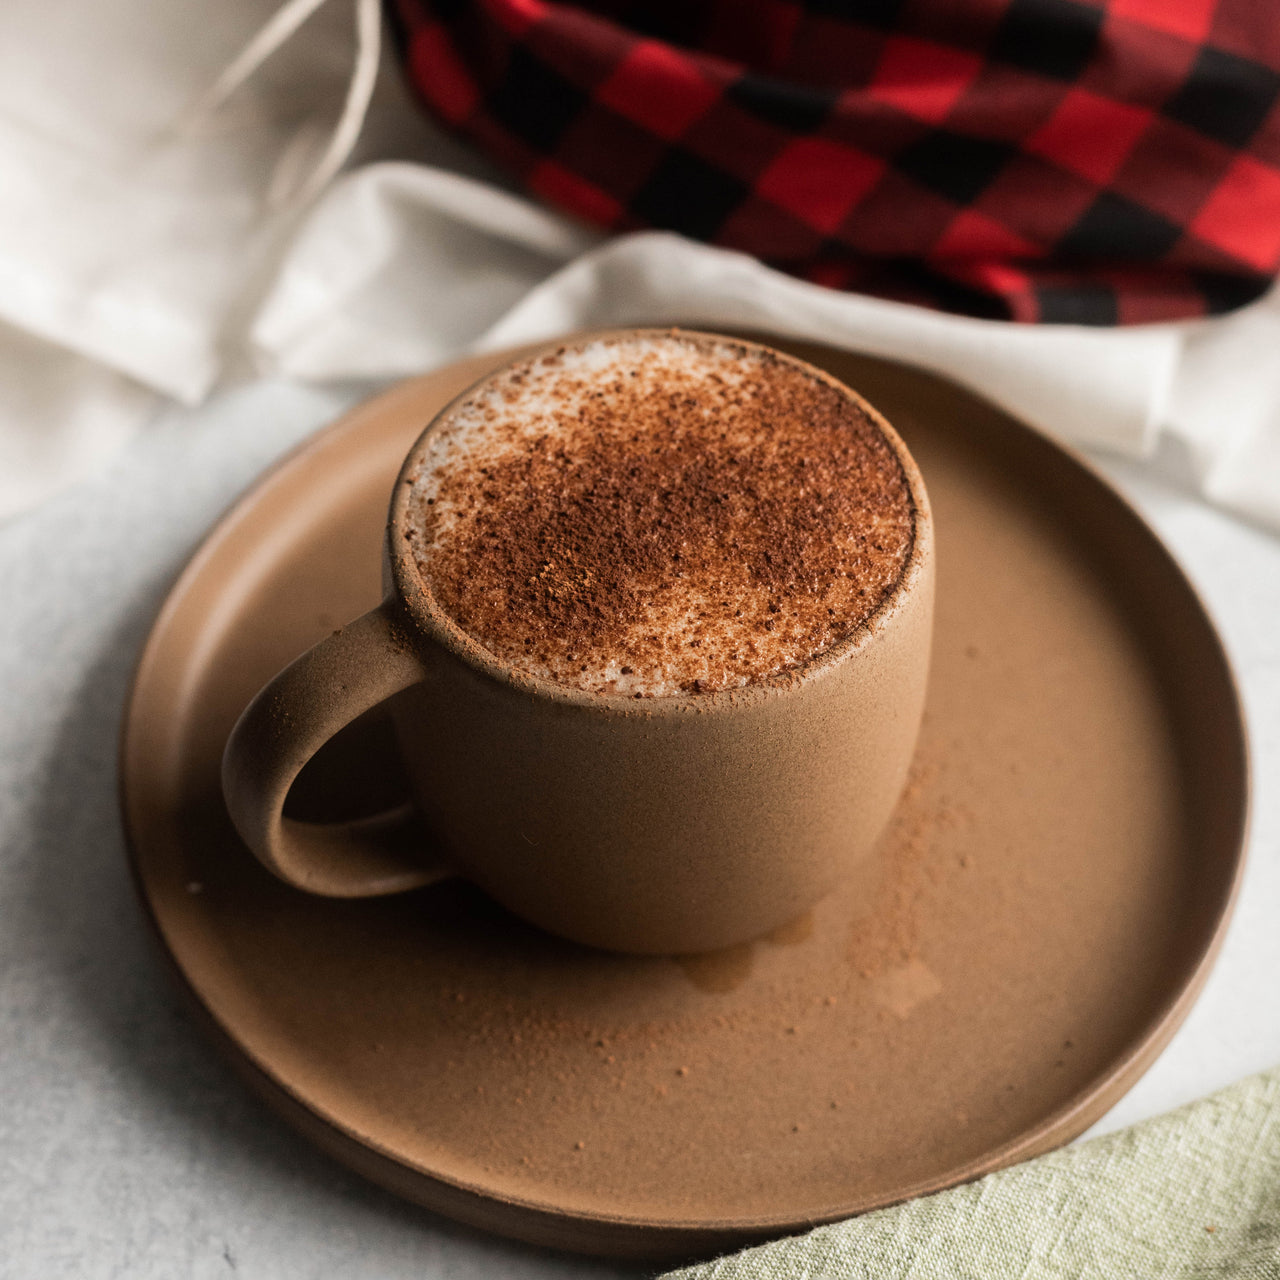 Superfood Hot Cocoa in brown mug on brown plate